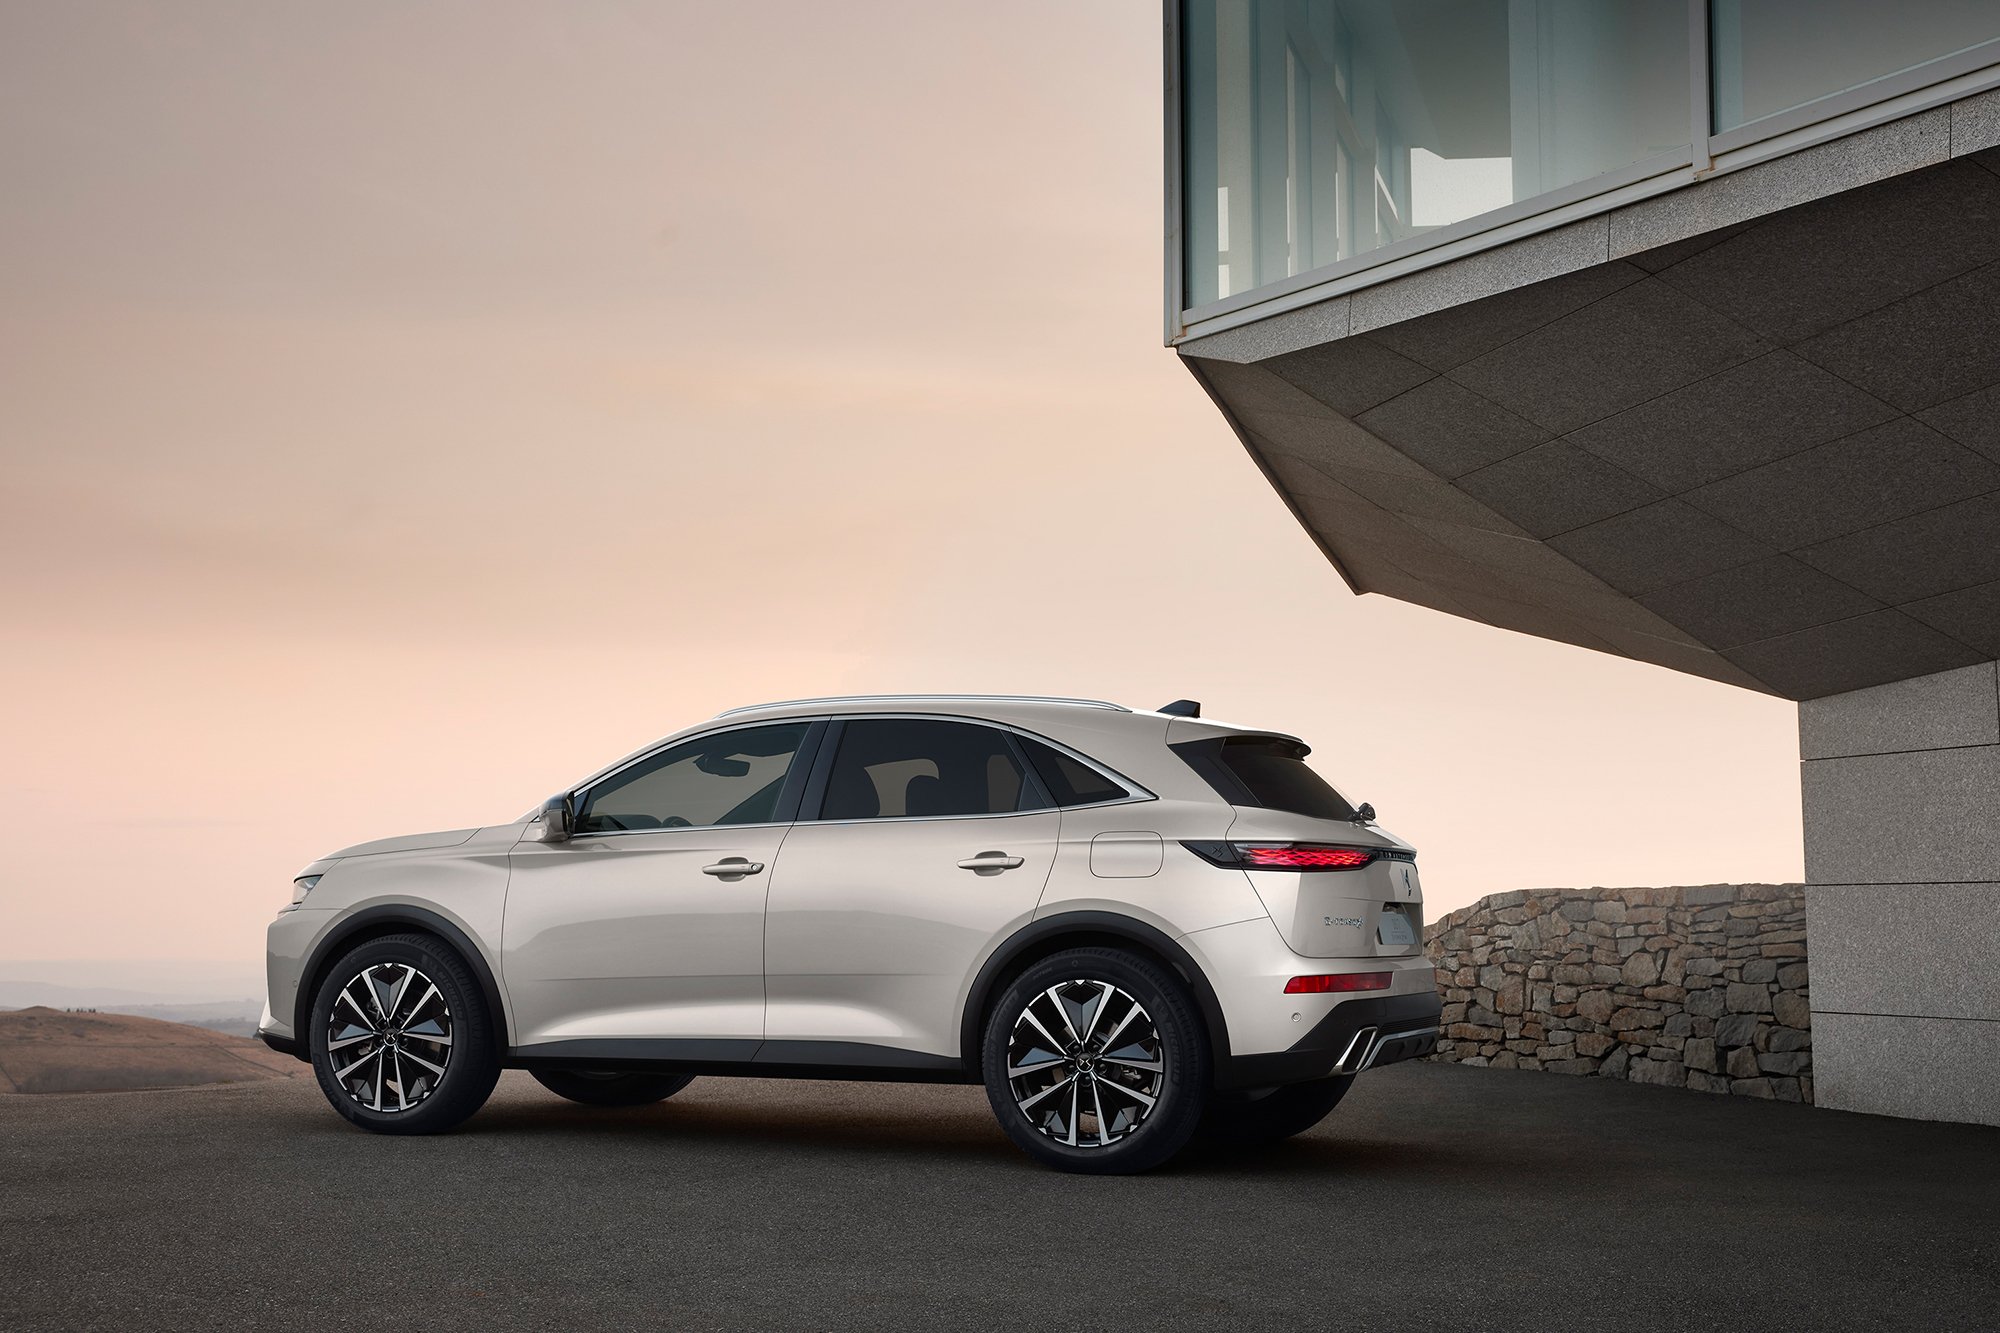 Exterior design of the DS Automobiles' new DS 7